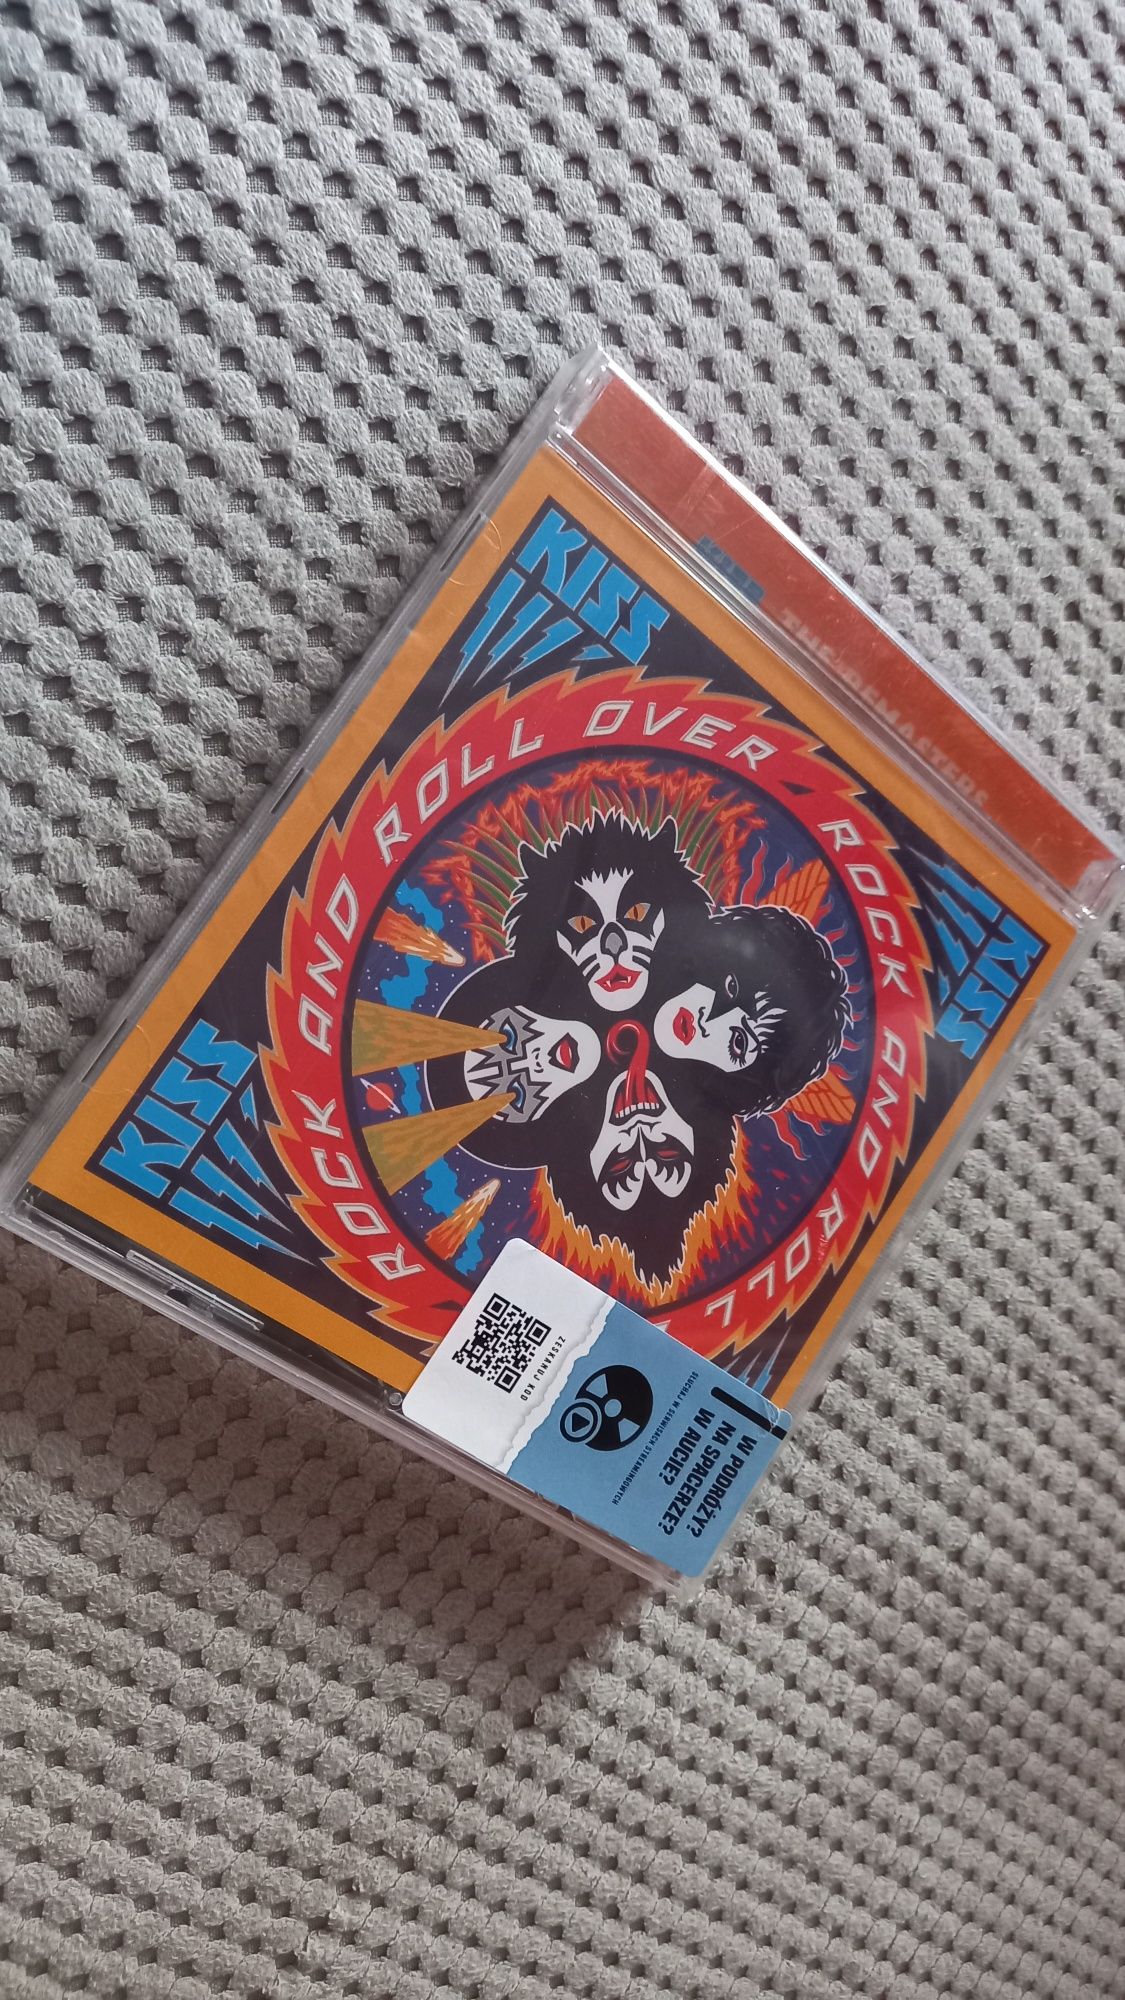 Kiss rock and roll over cd